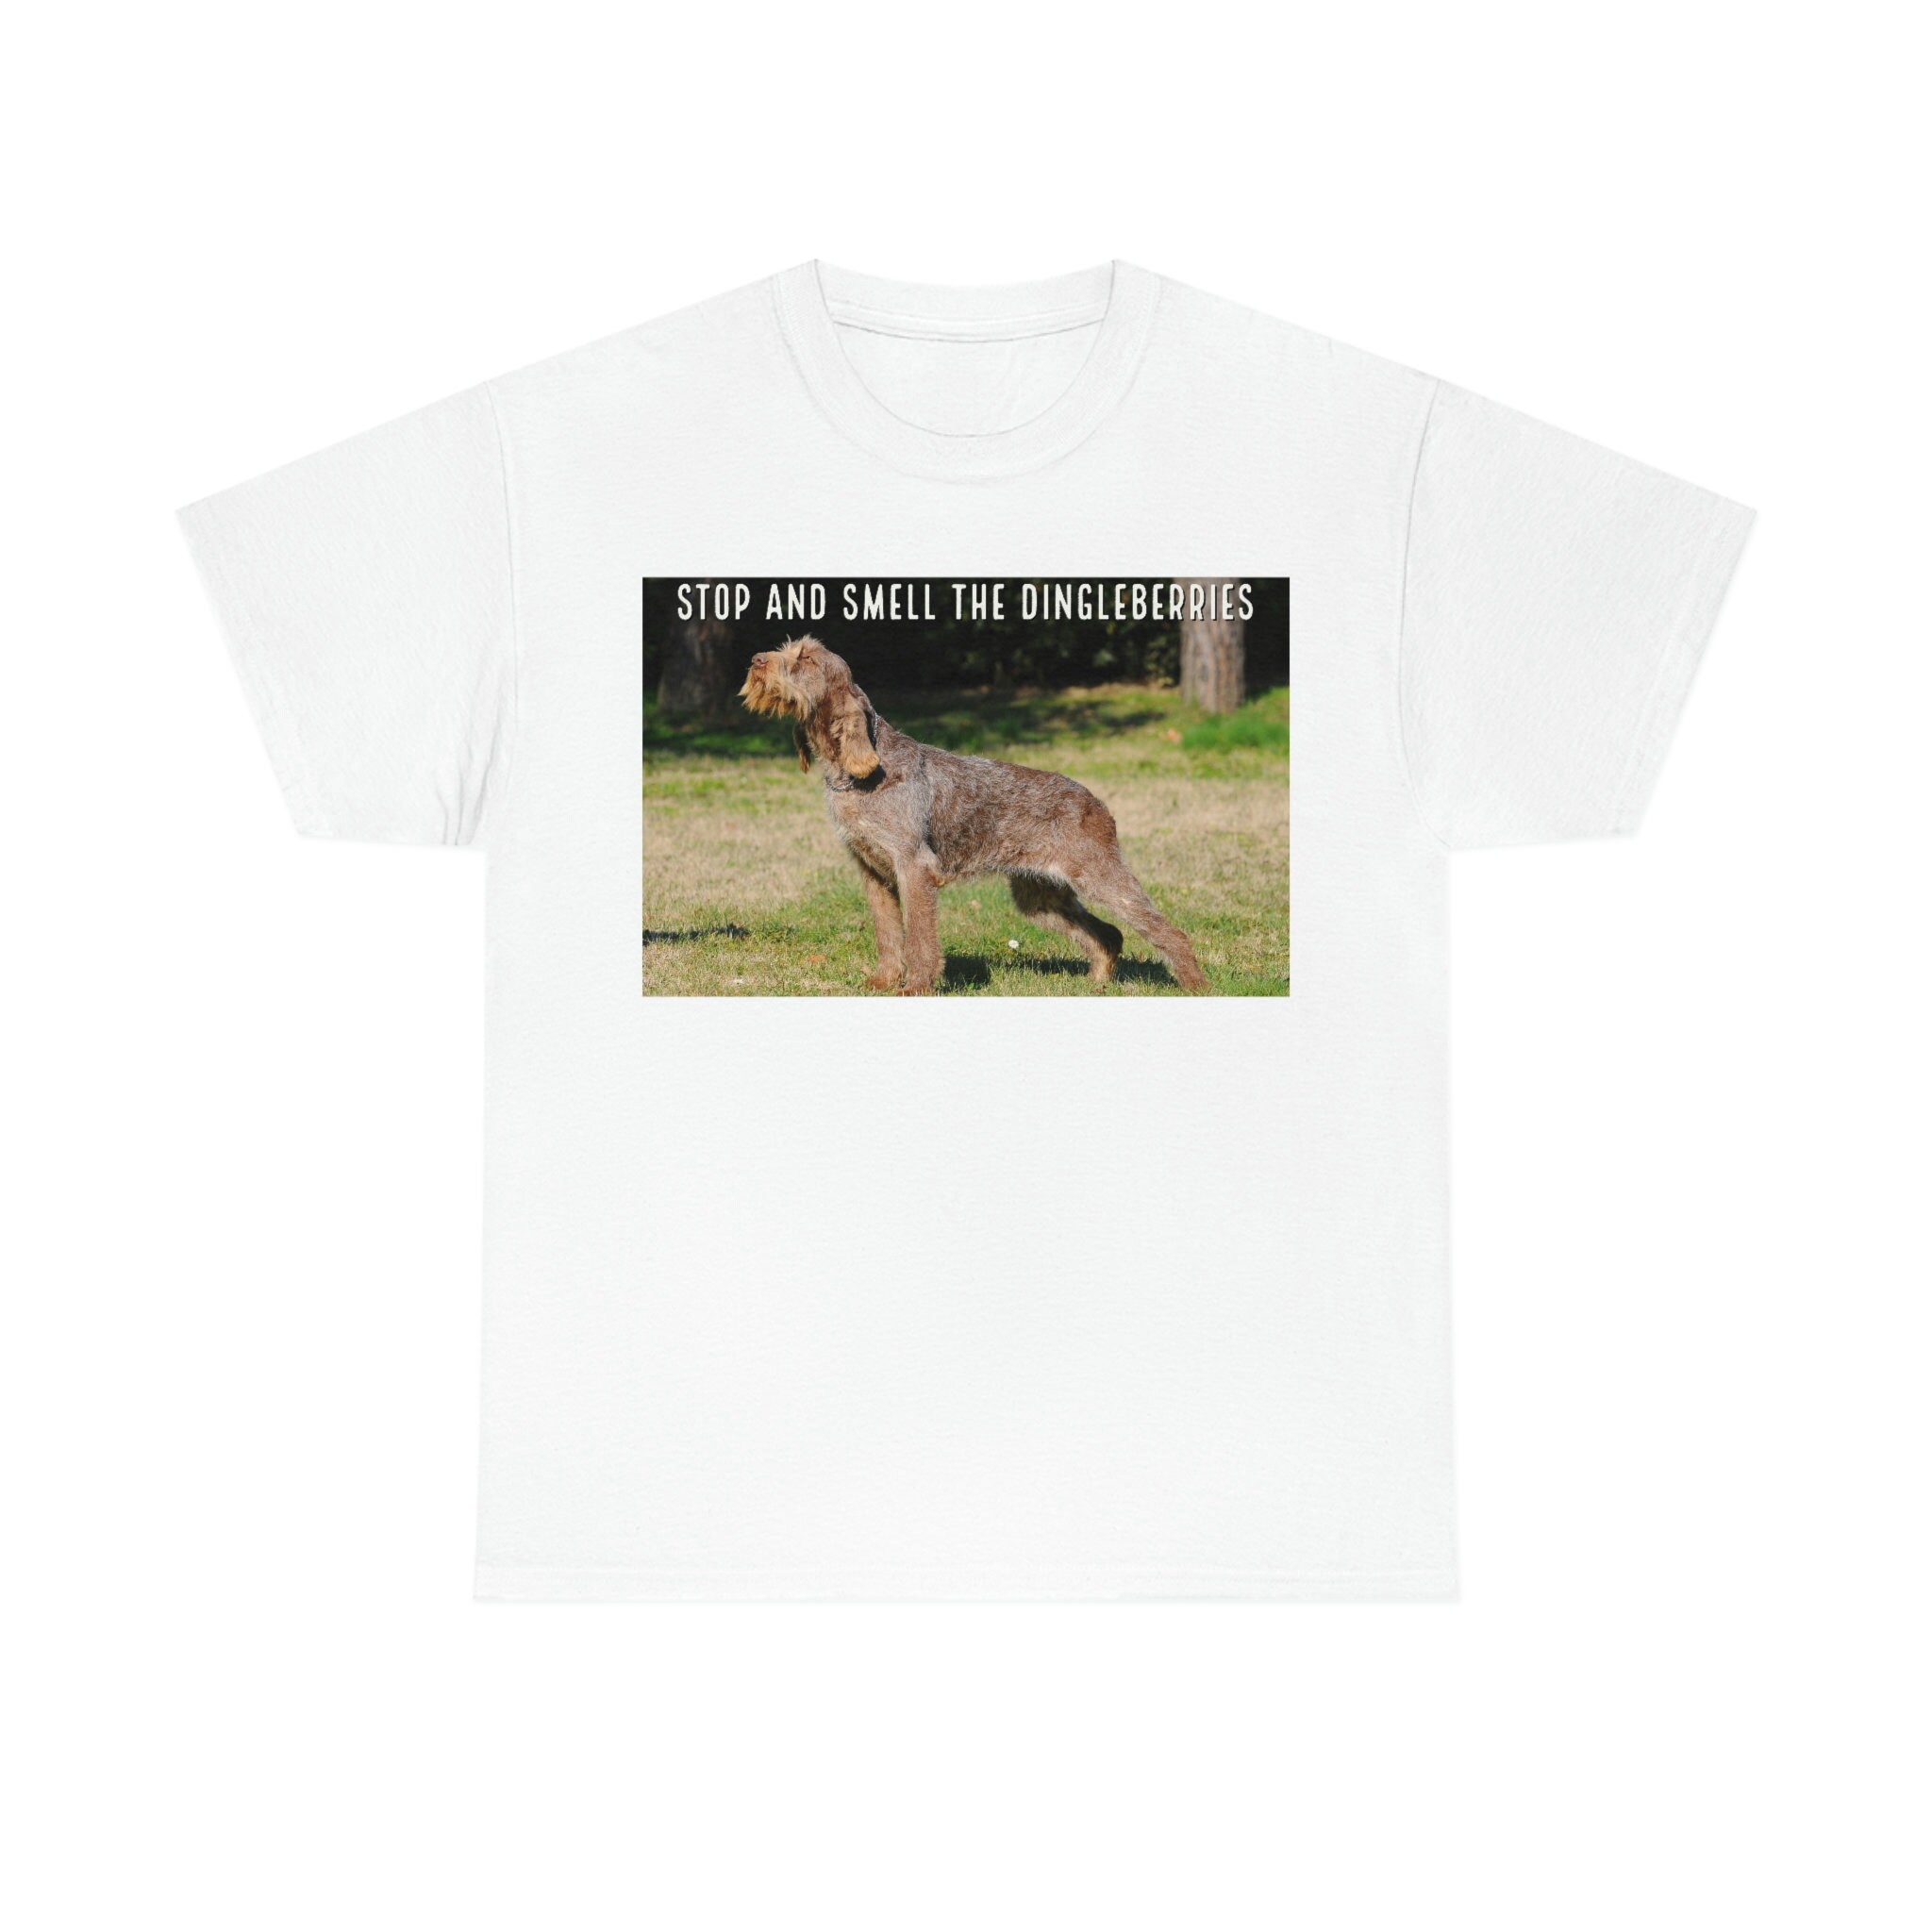 What Are You Looking At Dingleberry? Dog T-Shirt